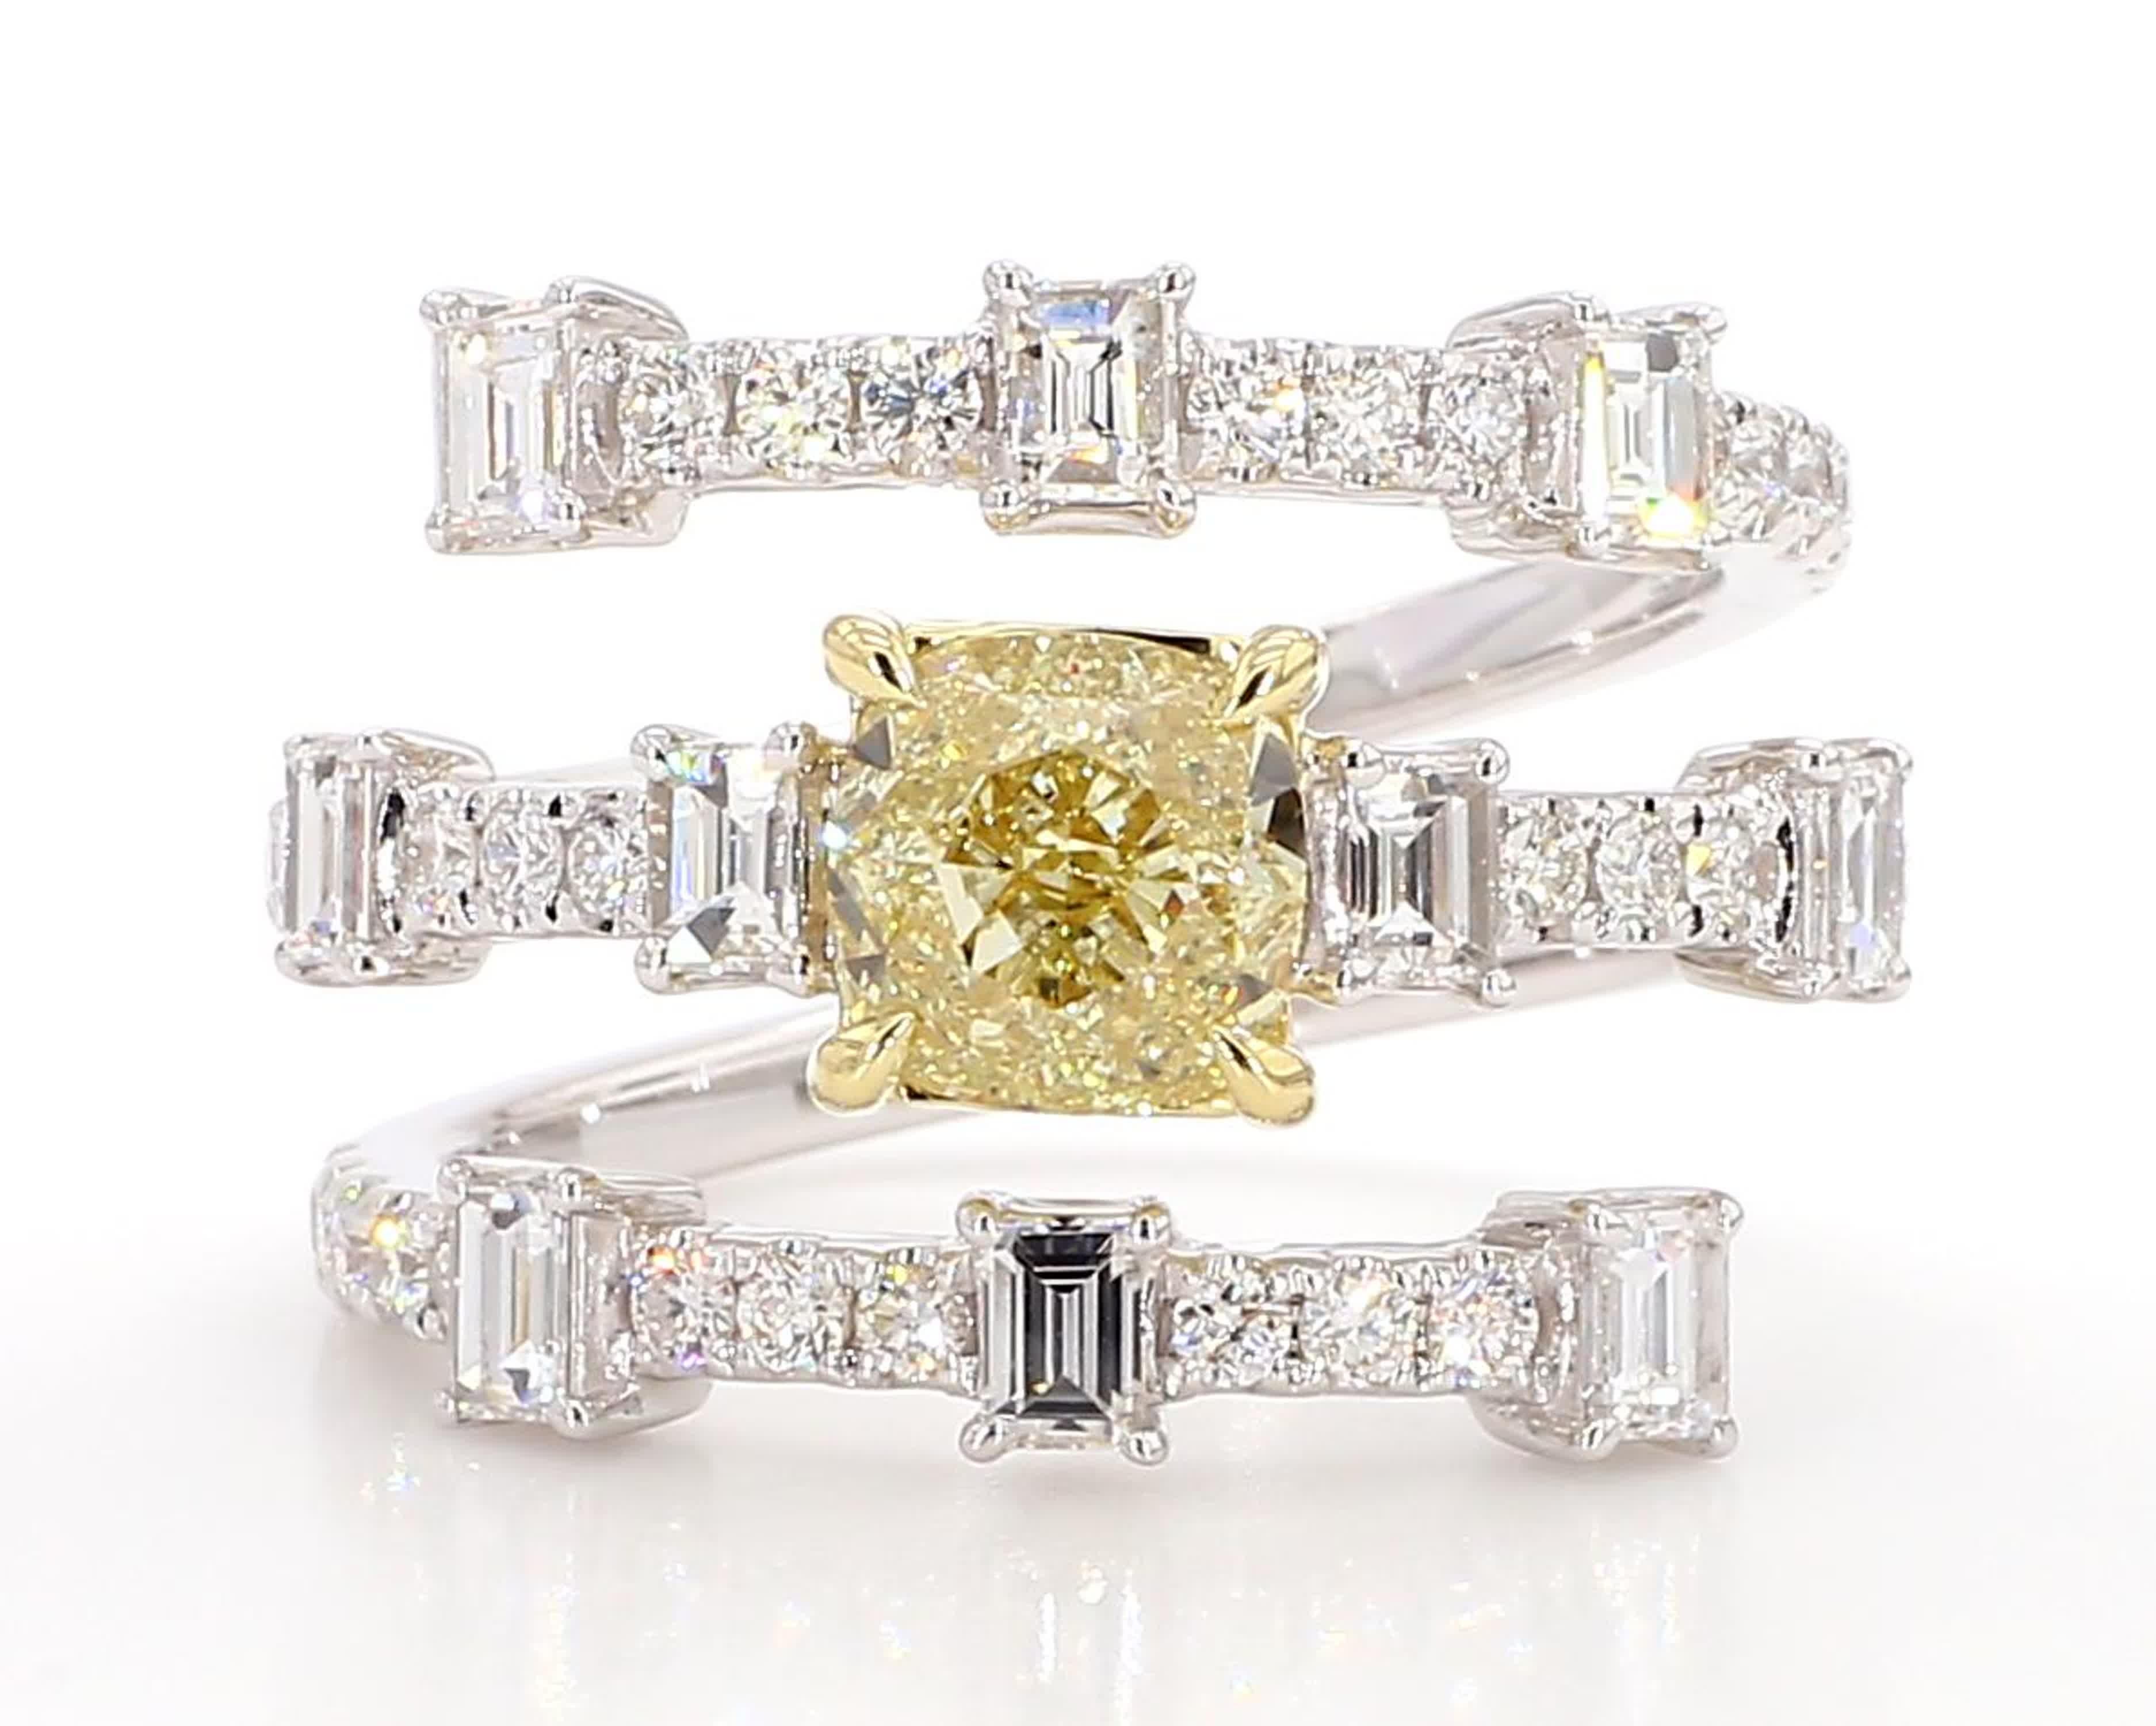 RareGemWorld's classic GIA certified diamond cocktail ring. Mounted in a beautiful 18K Yellow and White Gold setting with a natural cushion cut yellow diamond. The yellow diamond is surrounded by natural baguette cut white diamonds and round natural